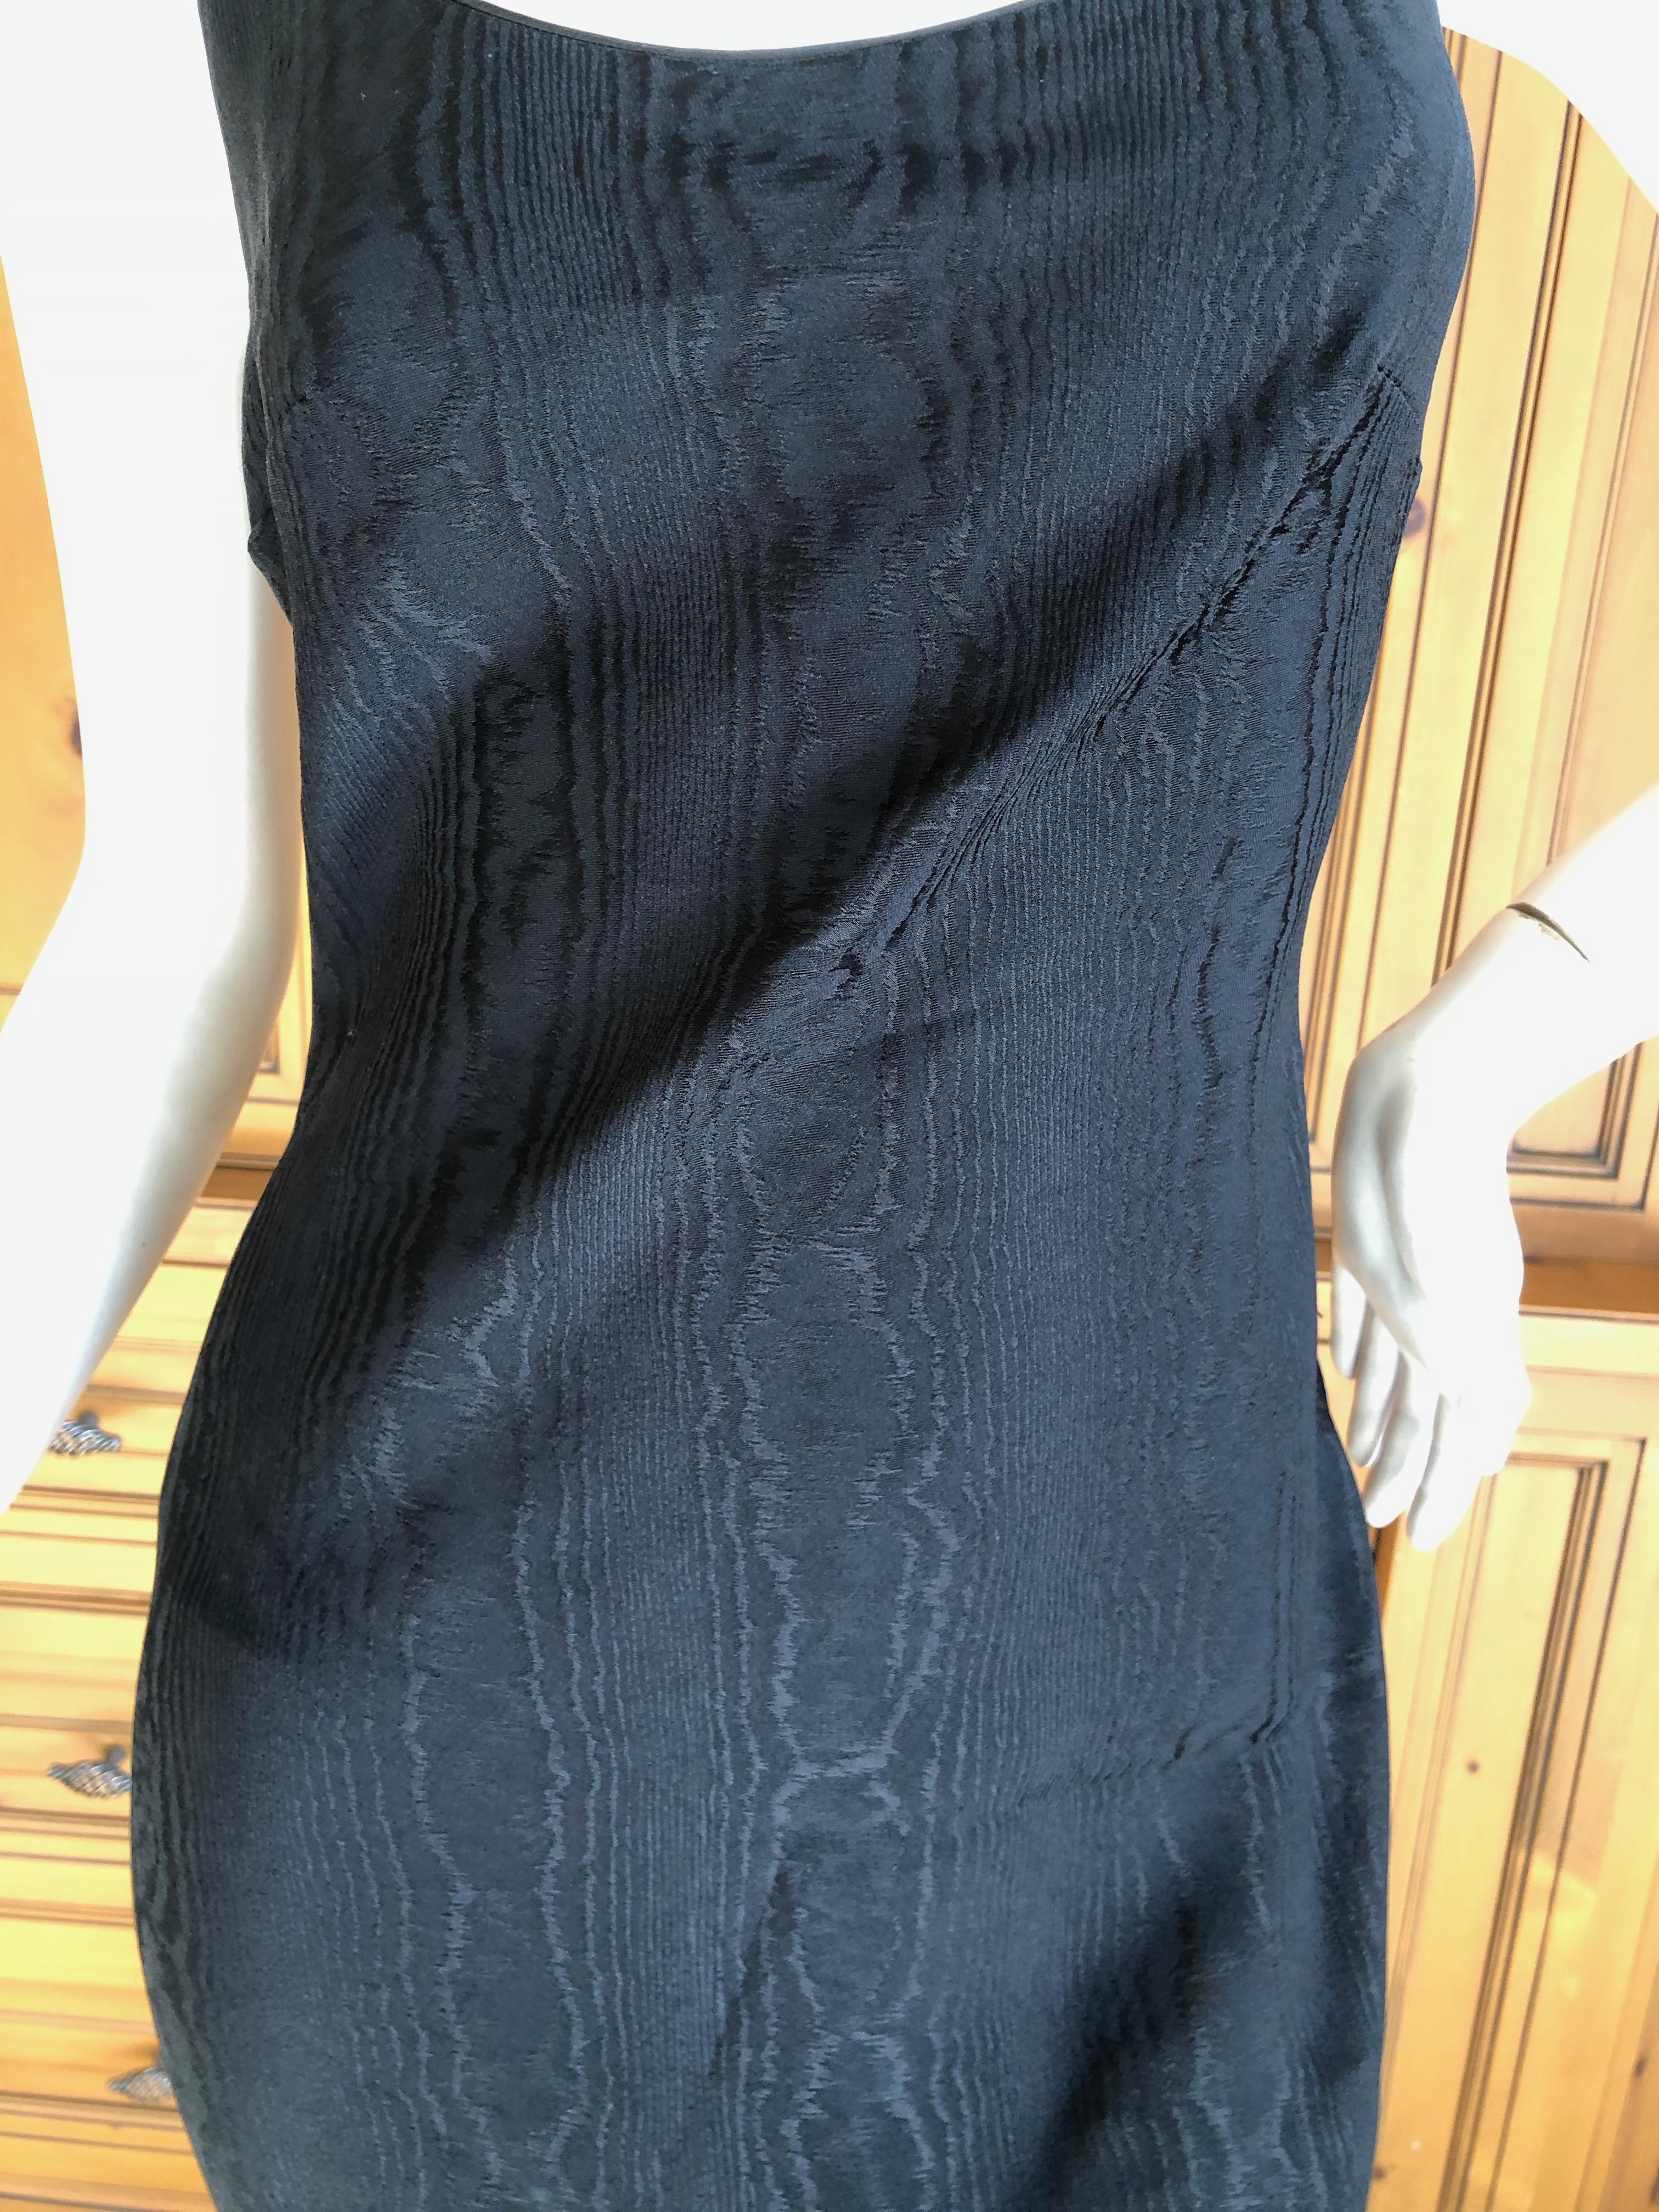 John Galliano Vintage 1999 Bias Cut Wood Grain Pattern Black Evening Dress In Excellent Condition For Sale In Cloverdale, CA